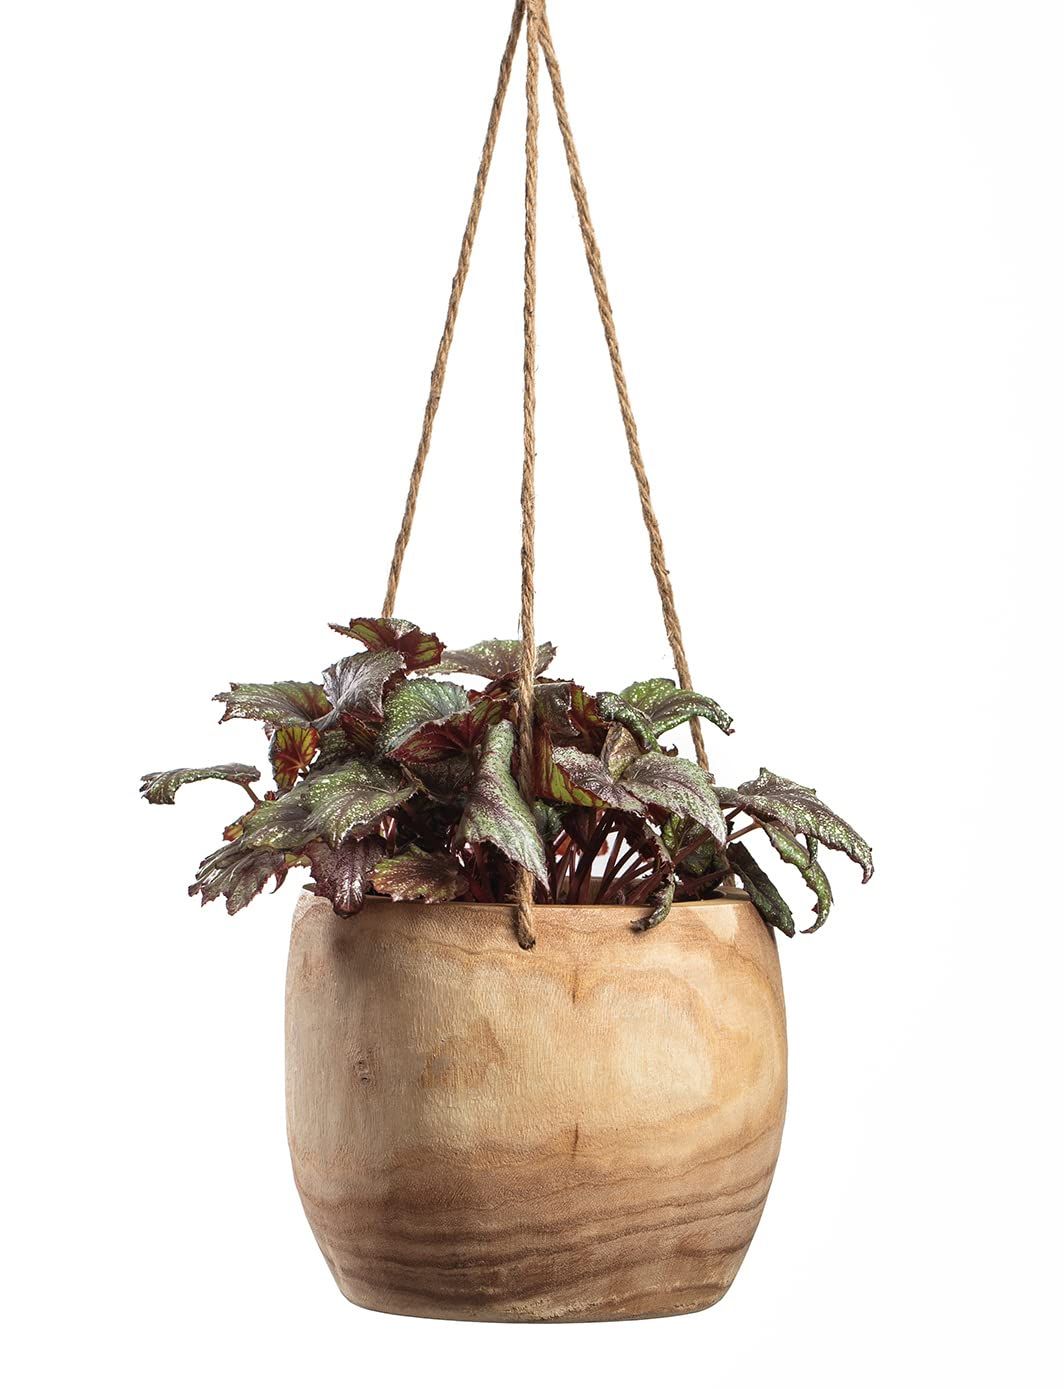 Wooden Hanging Planter - LuckyCrafts, Planter Pot for Indoor Plants and Flowers 8.6 Inch, Modern Mid | Amazon (US)